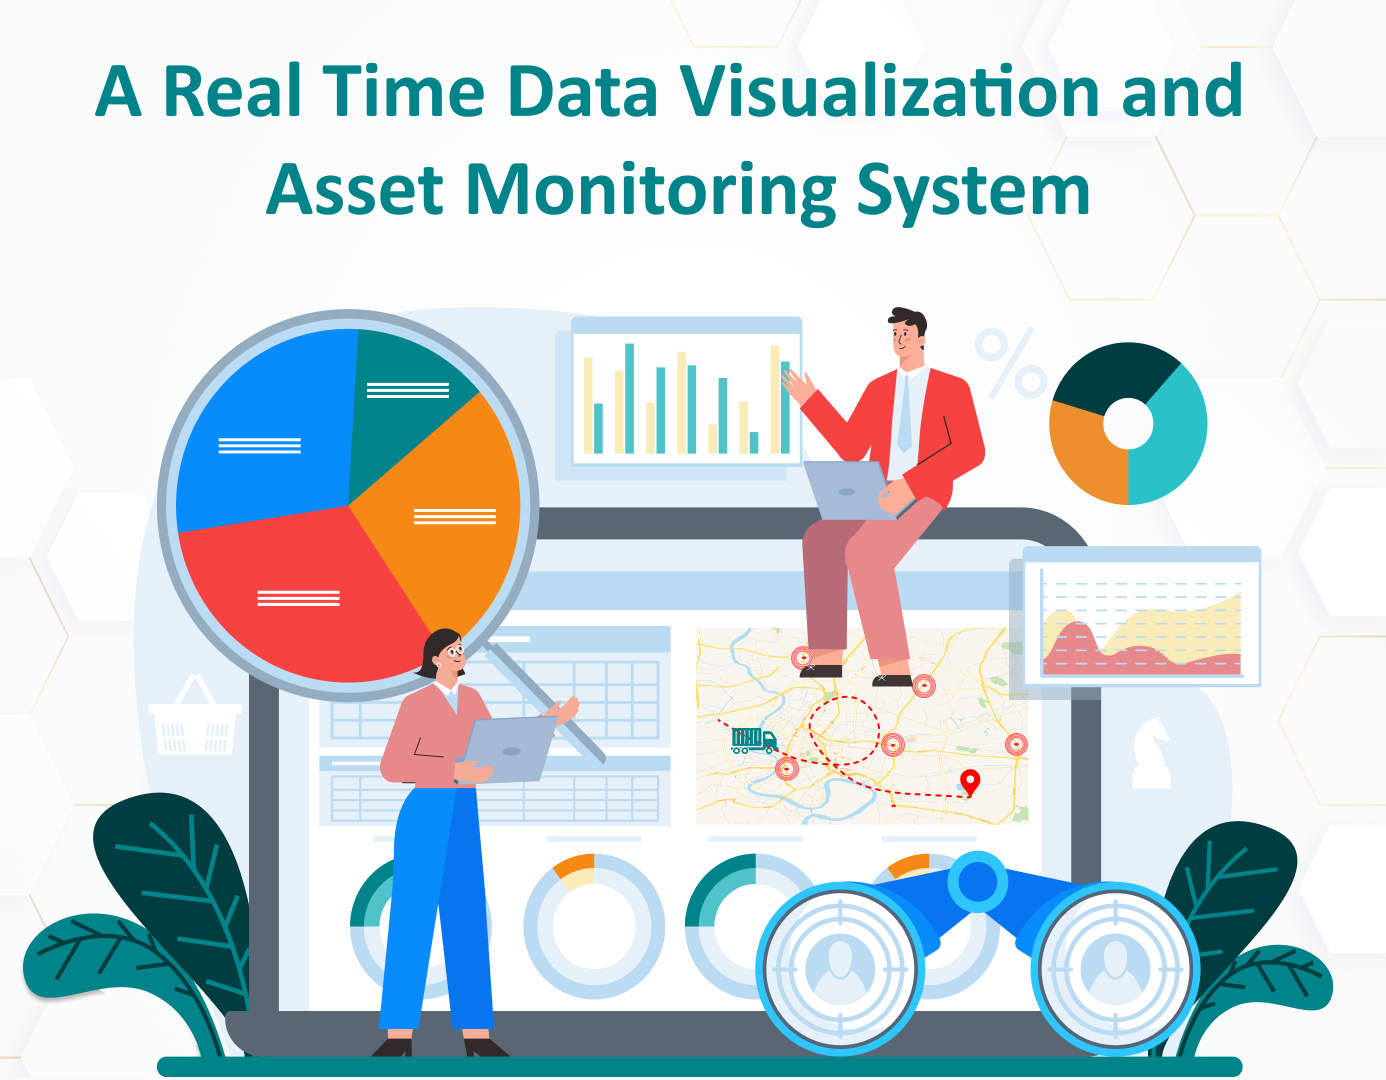 A Real Time Data Visualization and Asset Monitoring System